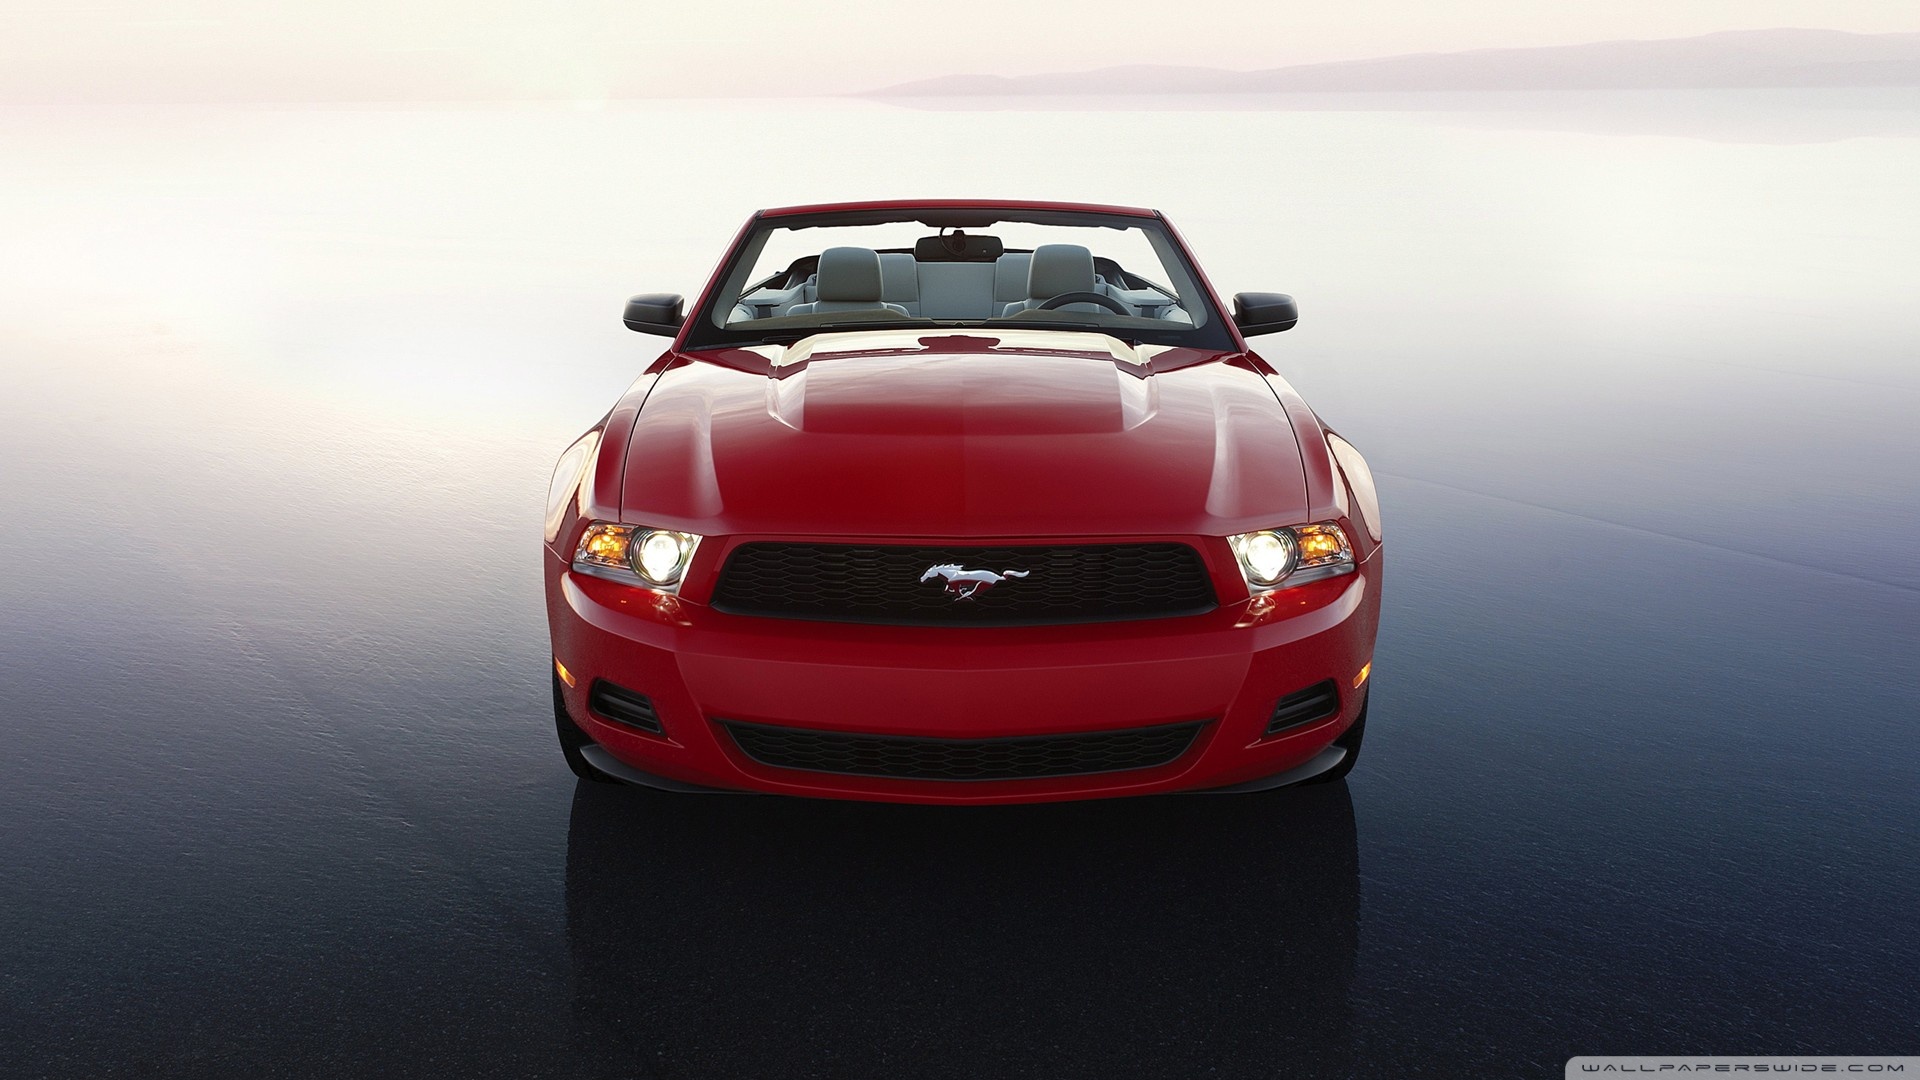 Red Ford Mustang Wallpaper